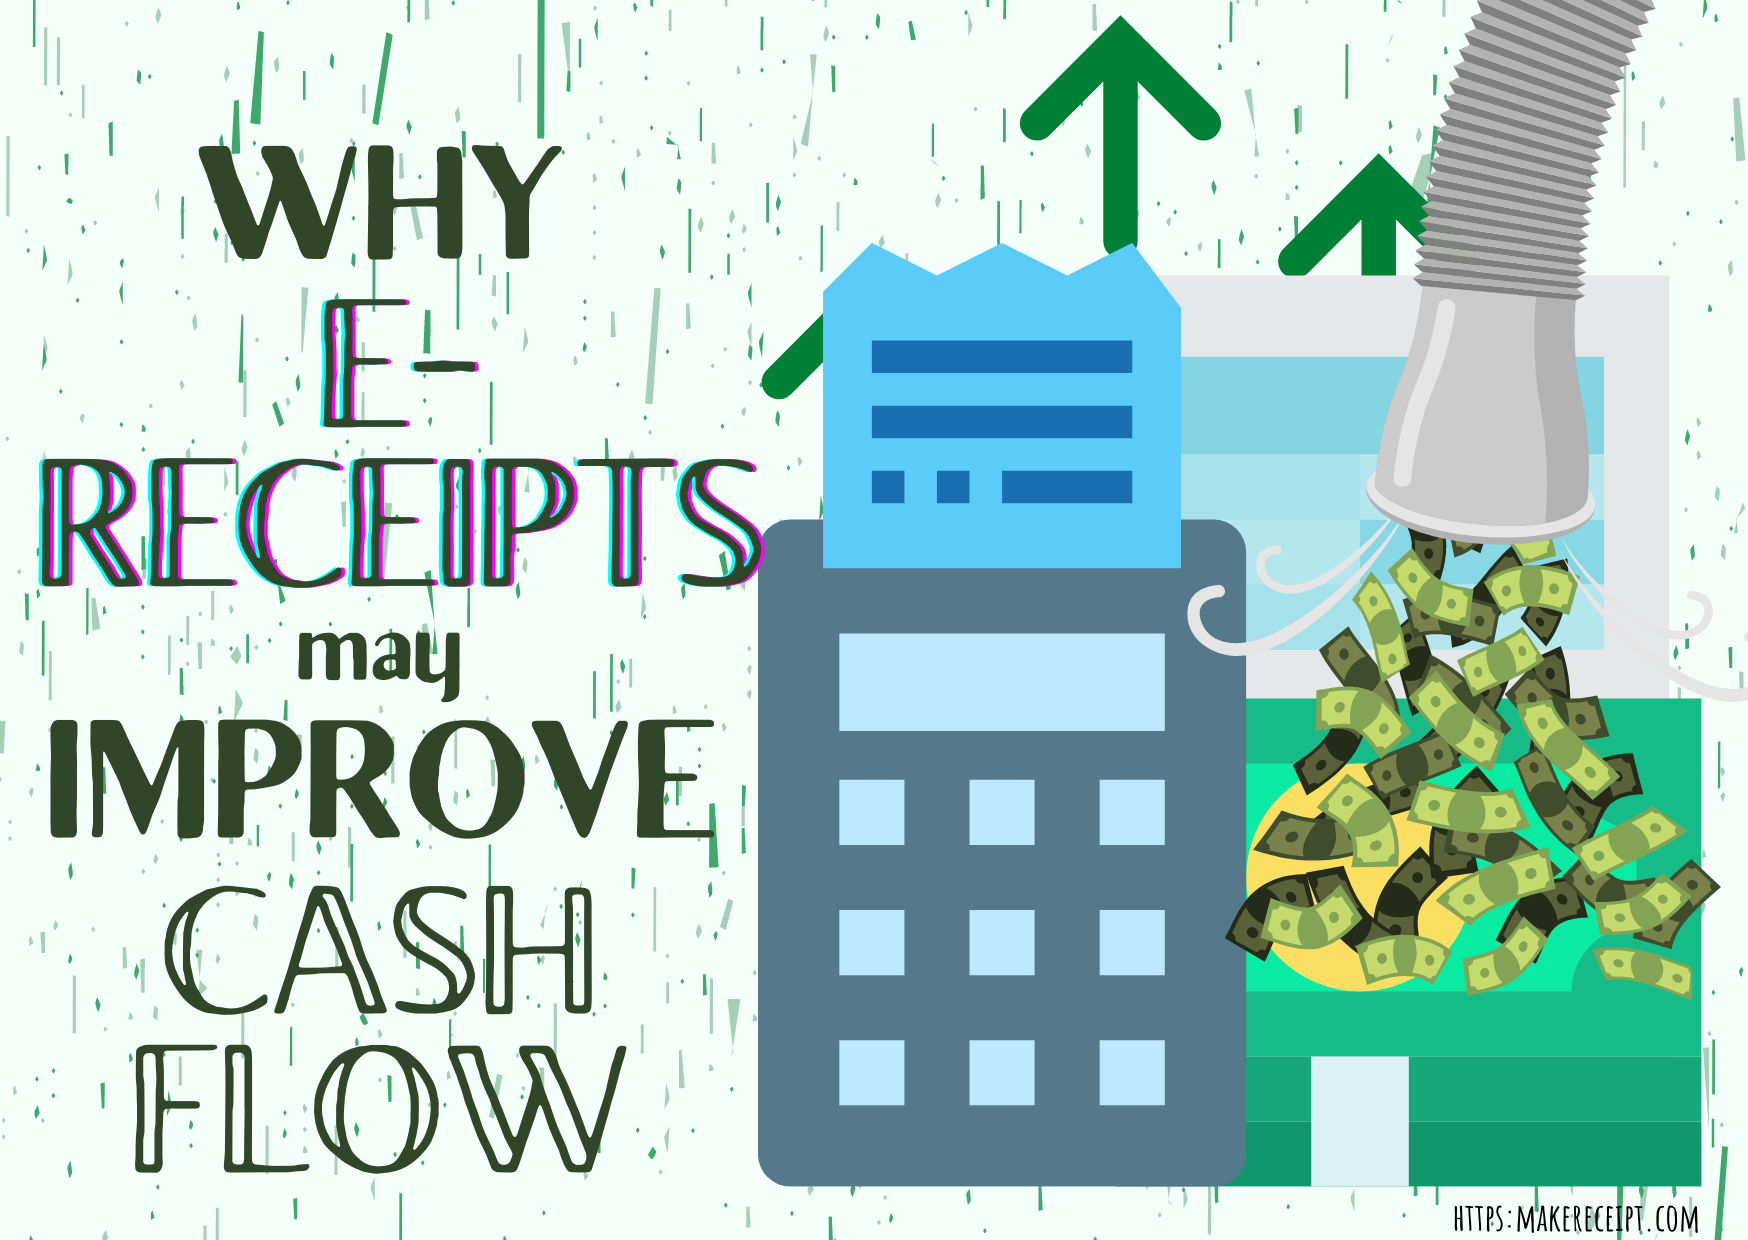 Why E-Receipts May Improve Cash Flow